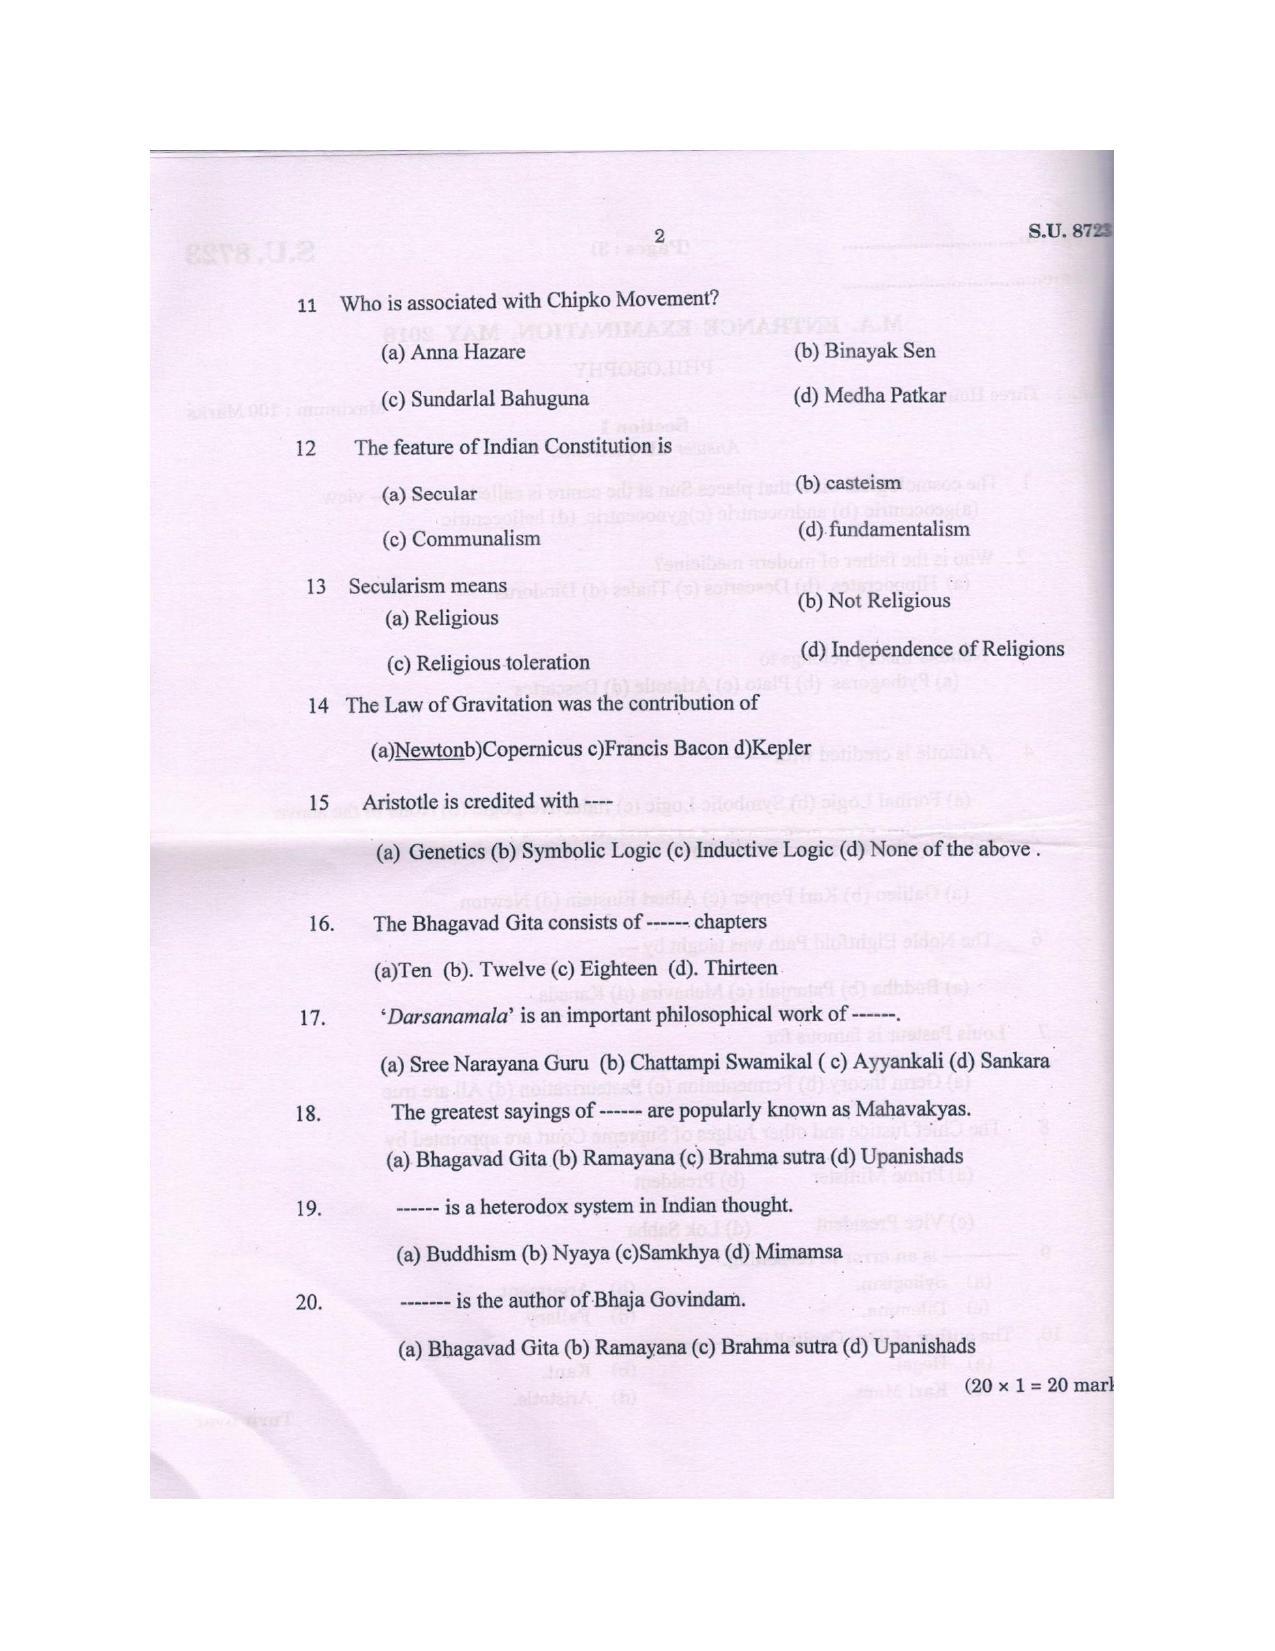 SSUS Entrance Exam PHILOSOPHY 2018 Question Paper - Page 2